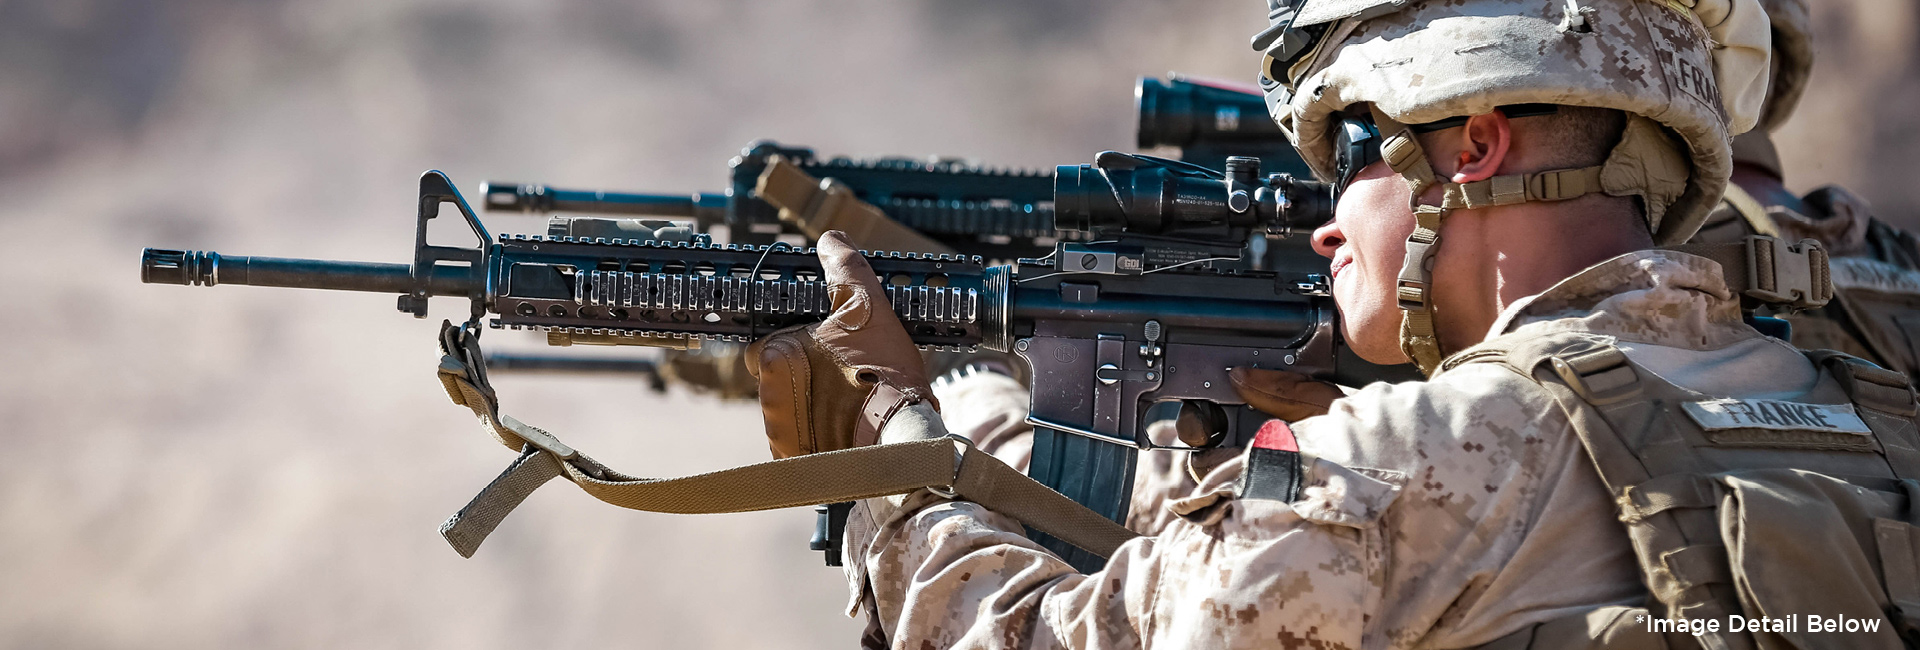 Central Command, Marine fires his M4 rifle during a live - fire range during Mission Rehearsal Exercise with Standard Issue Vickers Sling